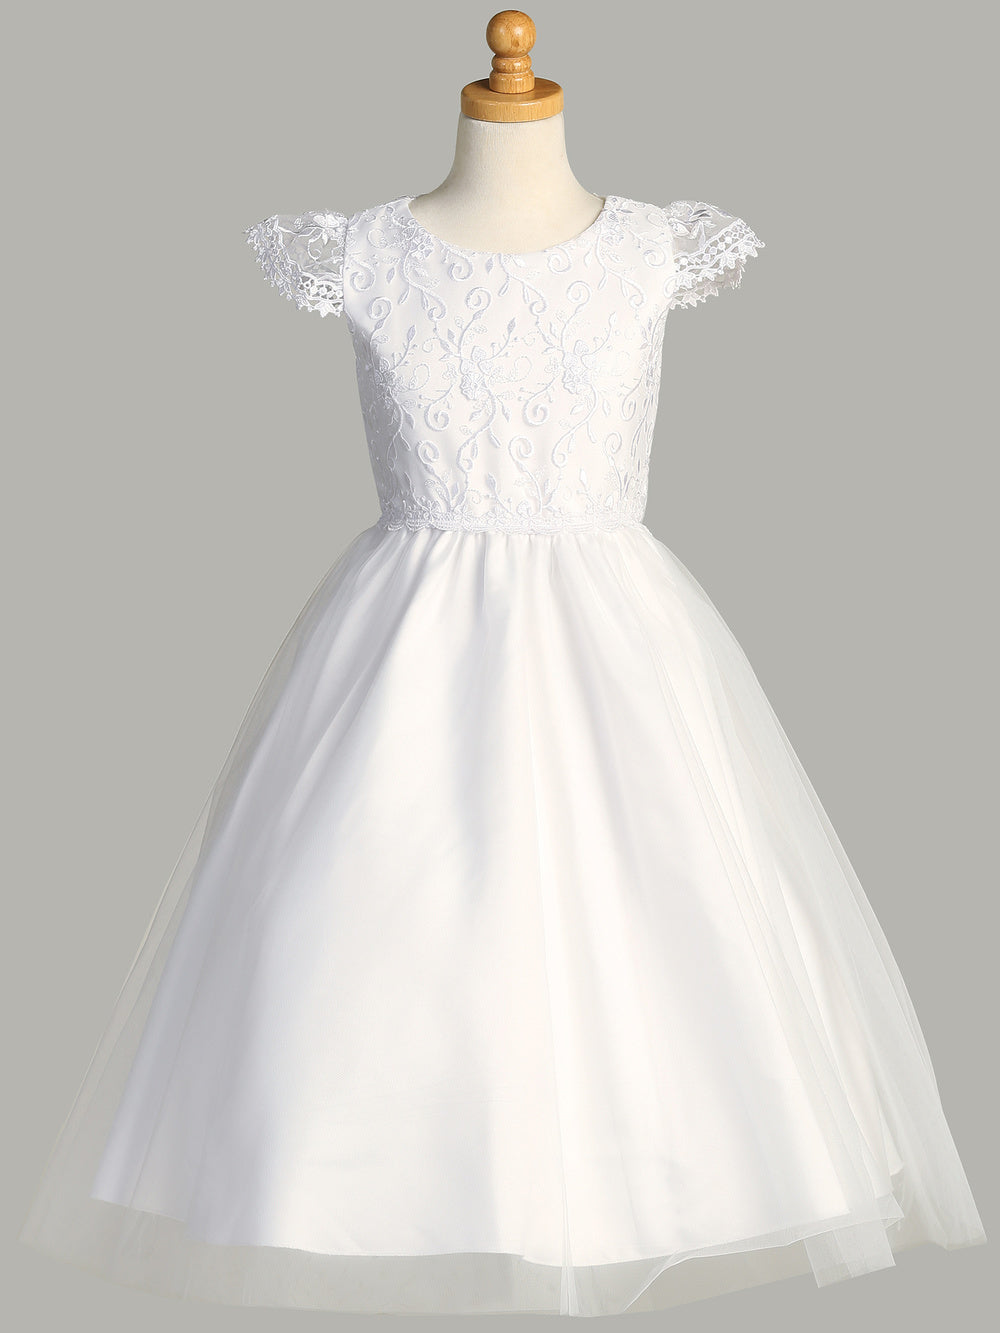 A full-length view of the First Communion Dress showing the tea-length and elegant tulle skirt.